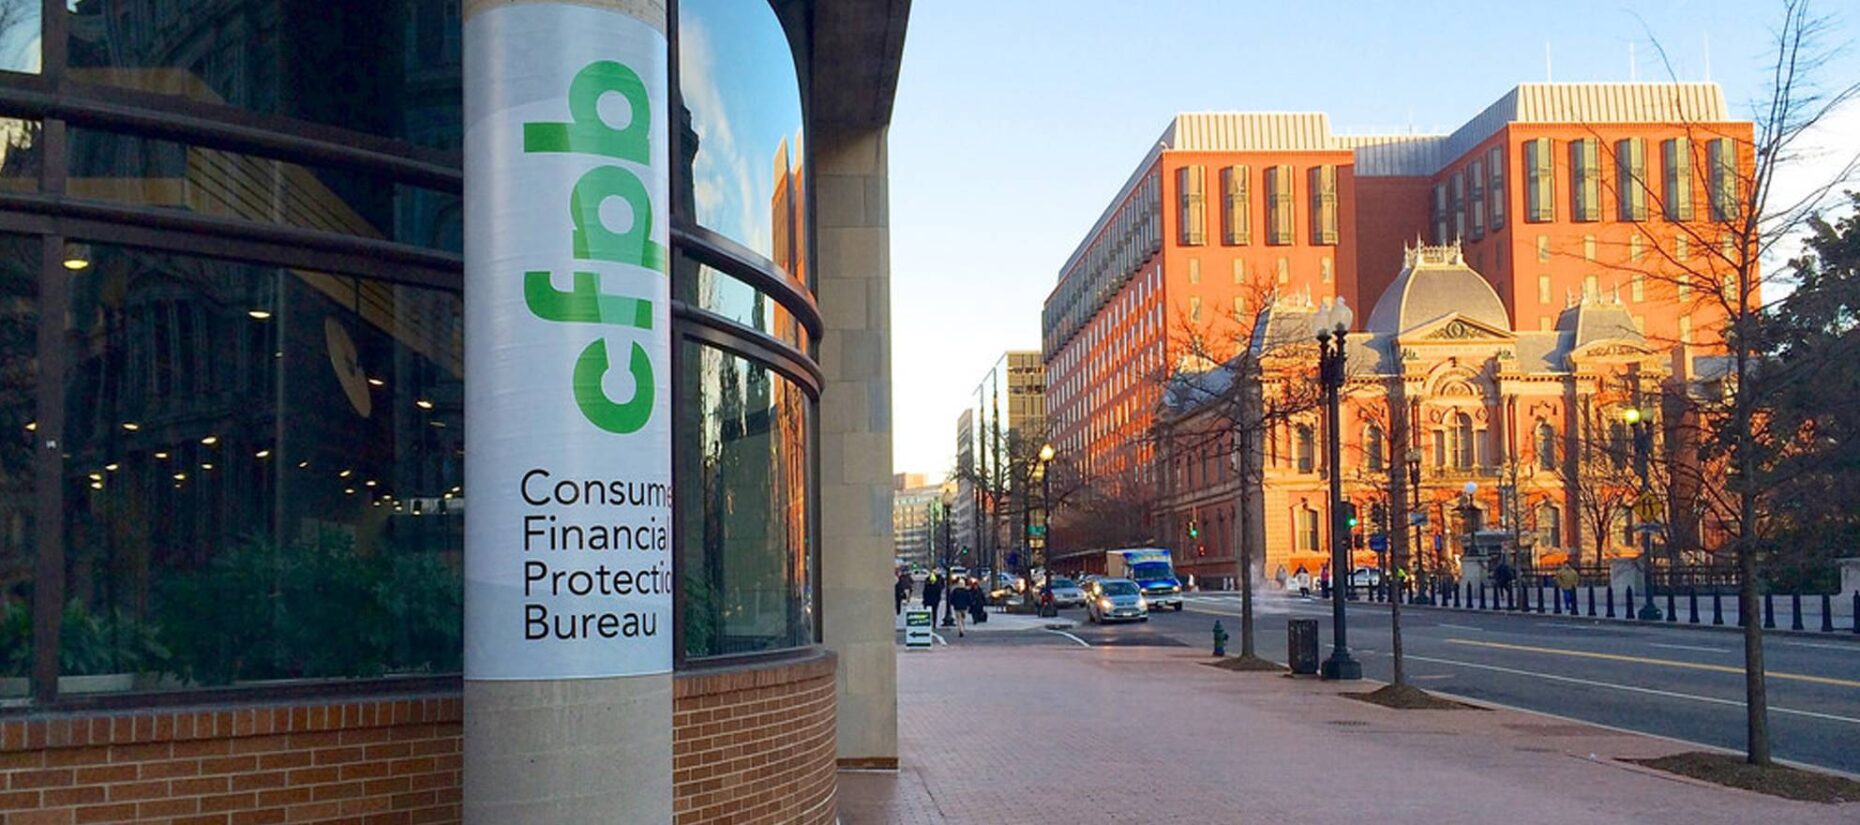 What Are The Powers Of The Consumer Financial Protection Bureau?